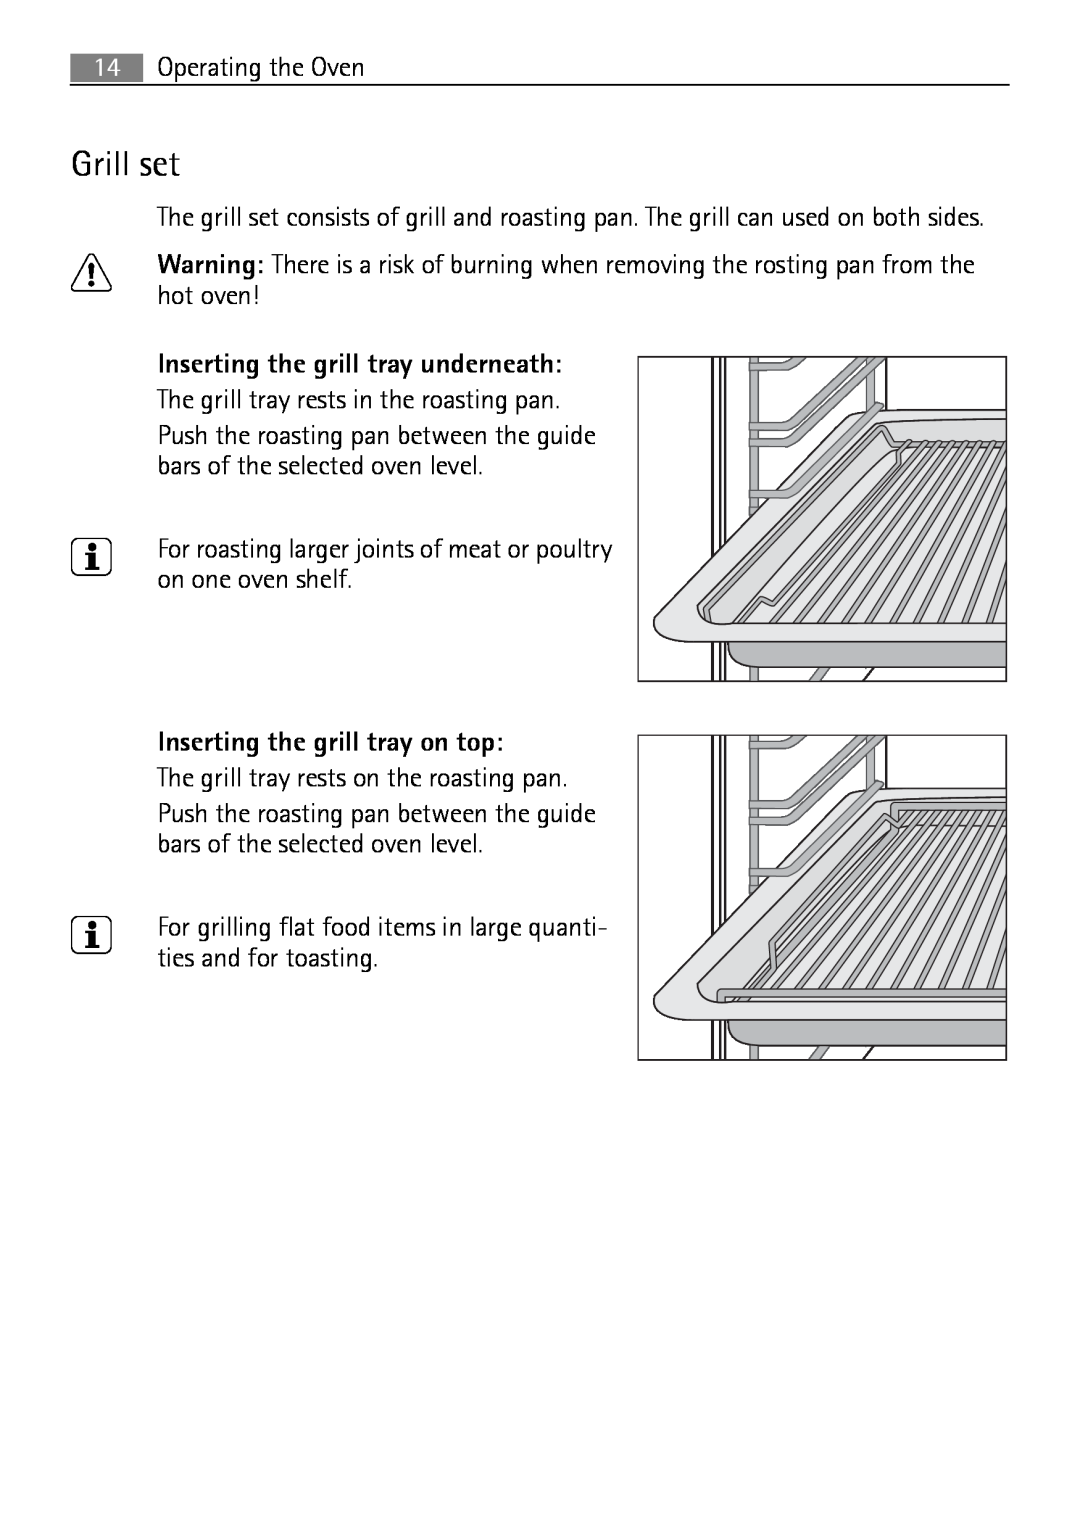 Electrolux B2100-5 user manual Inserting the grill tray underneath, Inserting the grill tray on top, Grill set 